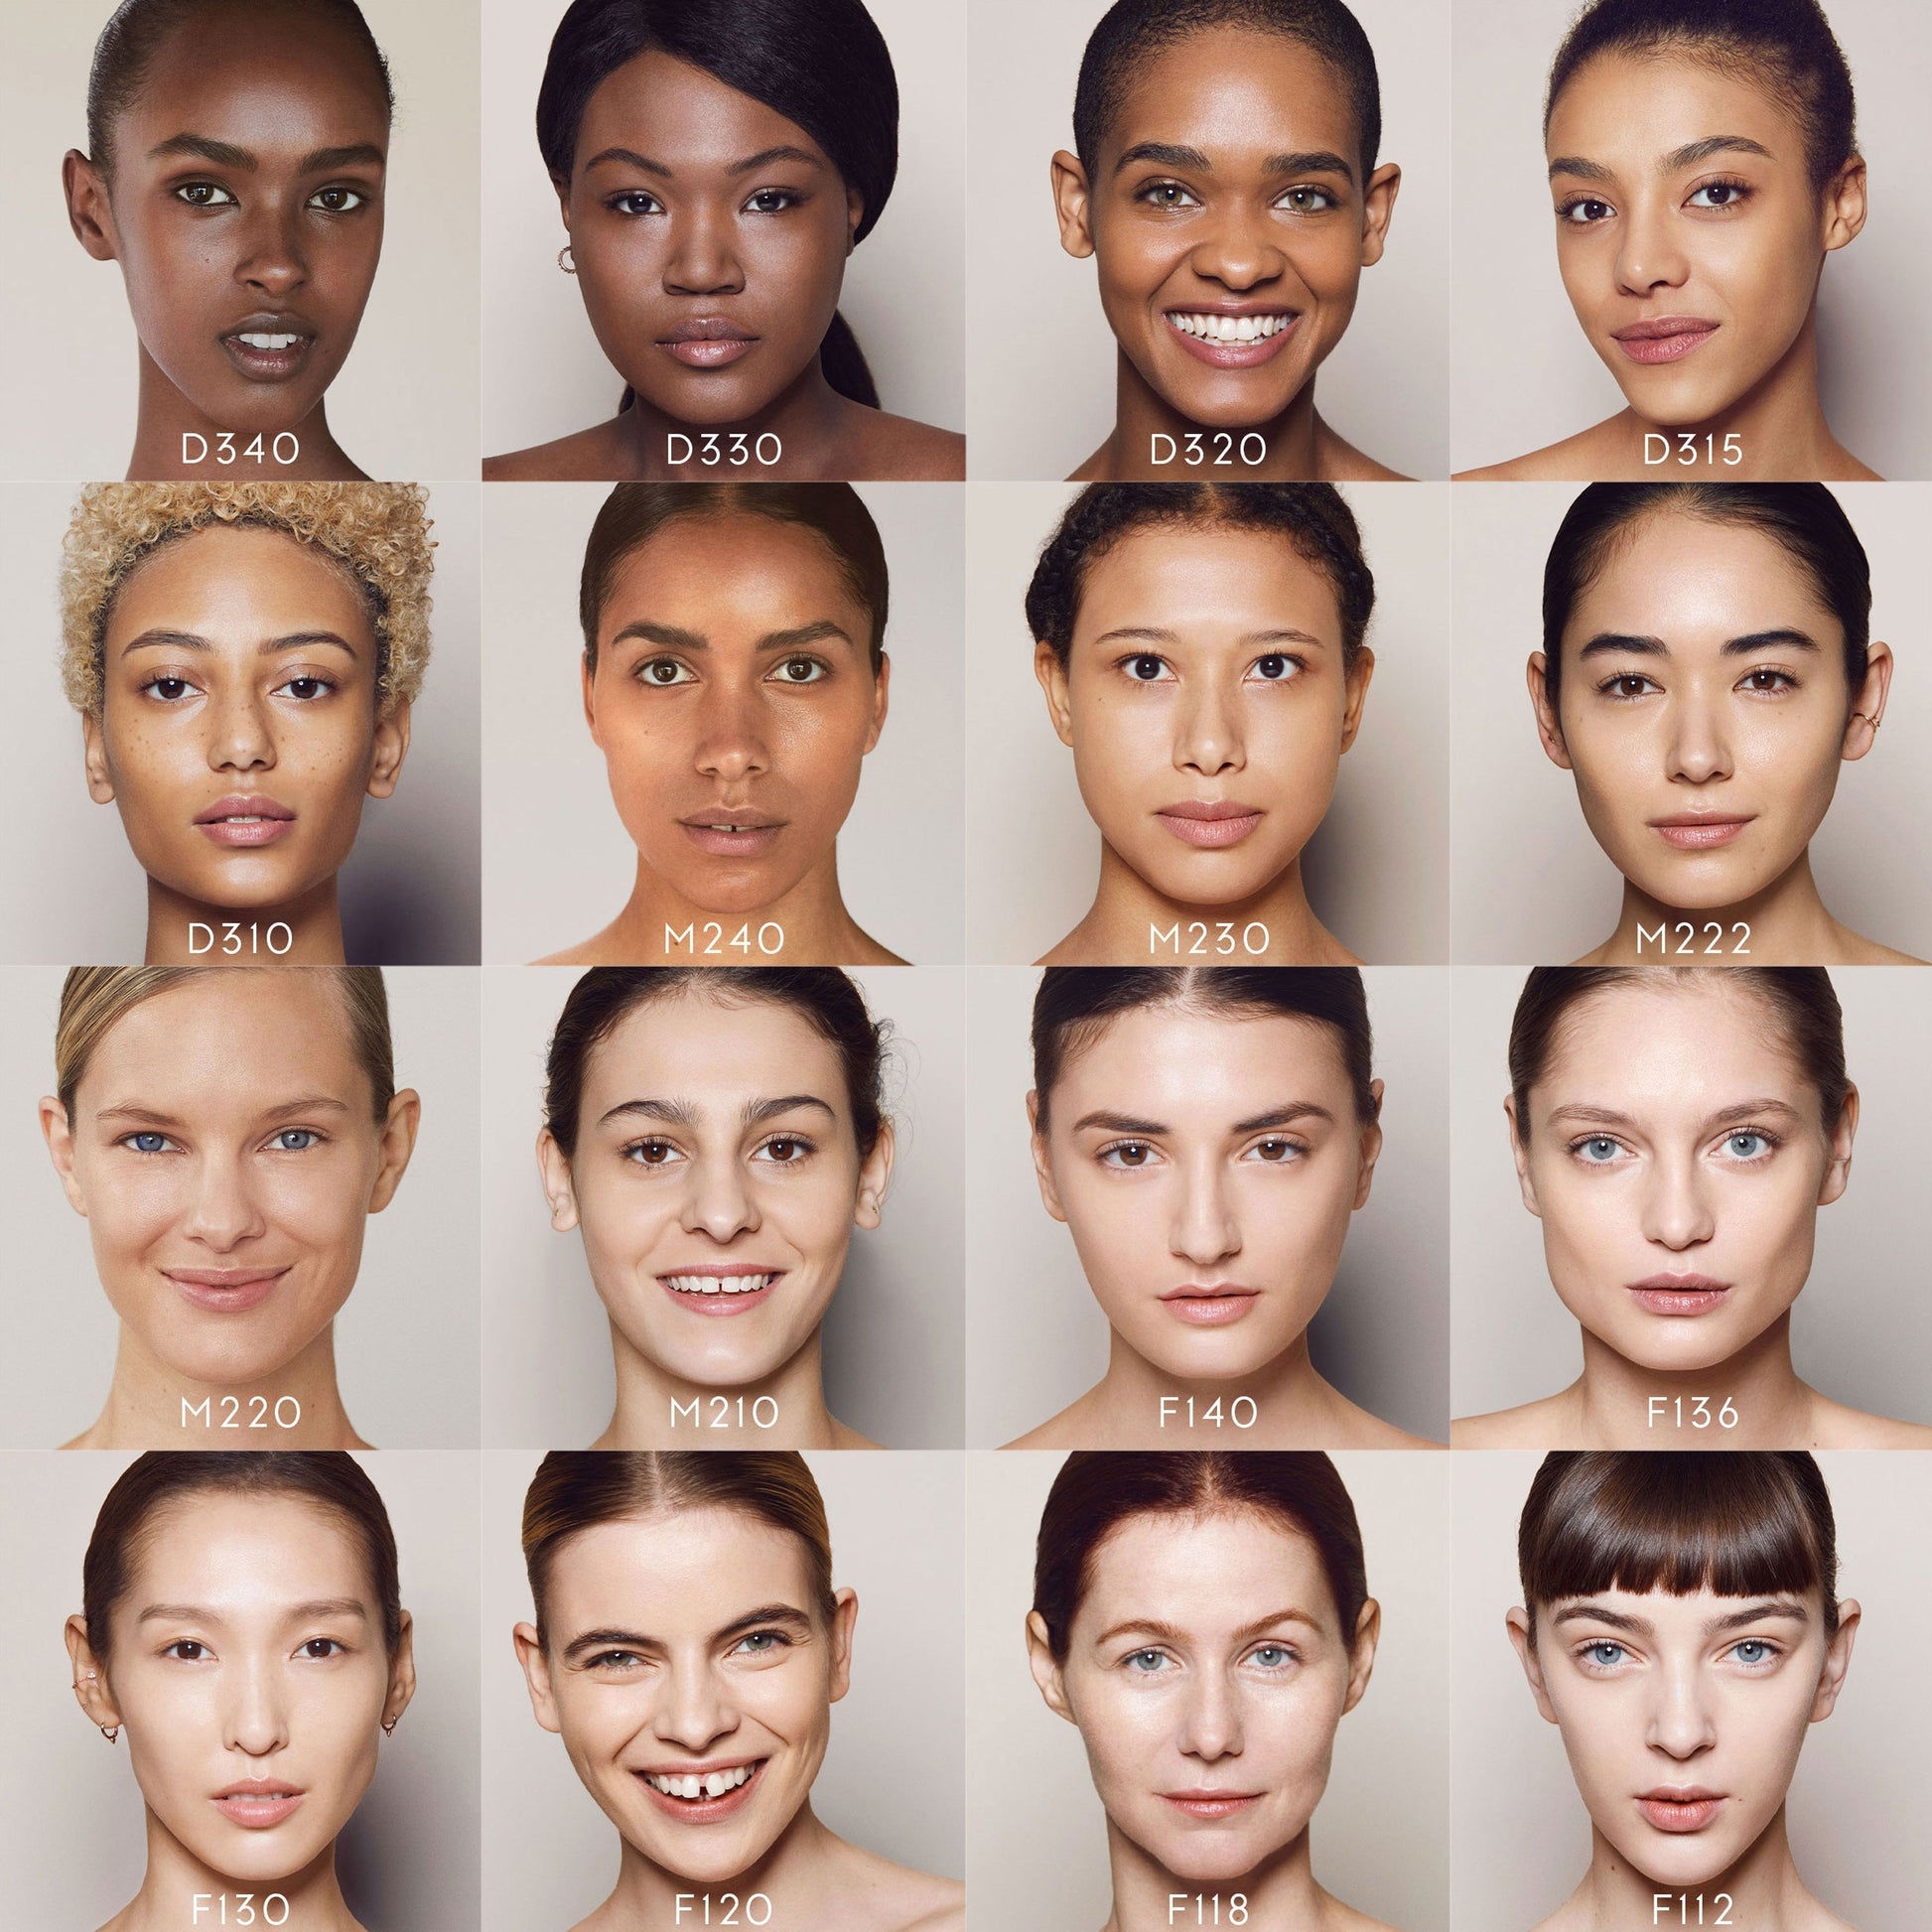 Close ups of various faces of different skin tones, from dark to light with the foundation shades they are wearing. M240 is the sixth-darkest shade shown. 